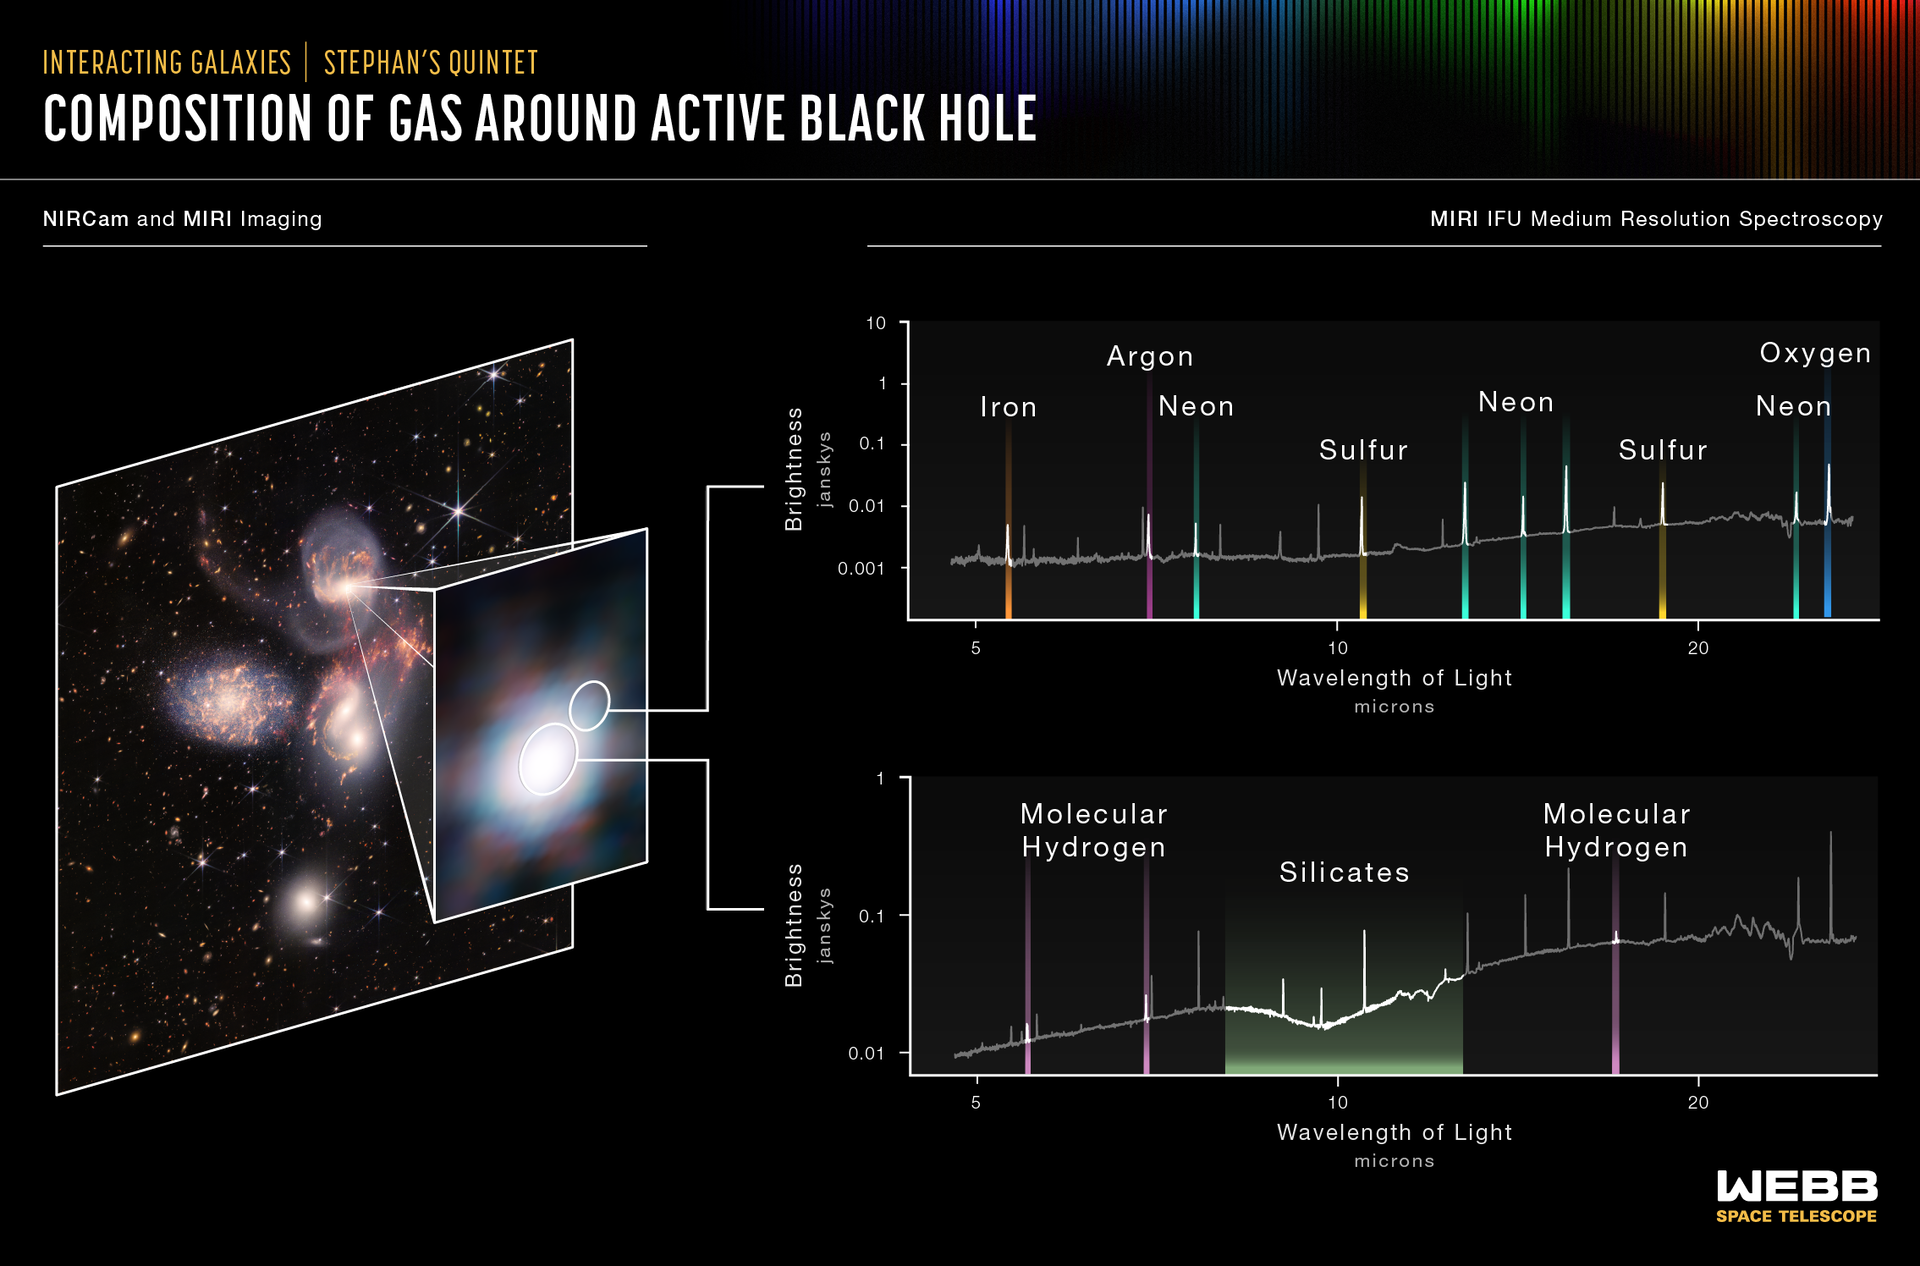 Composition of gas around active black hole (MIRI spectra)